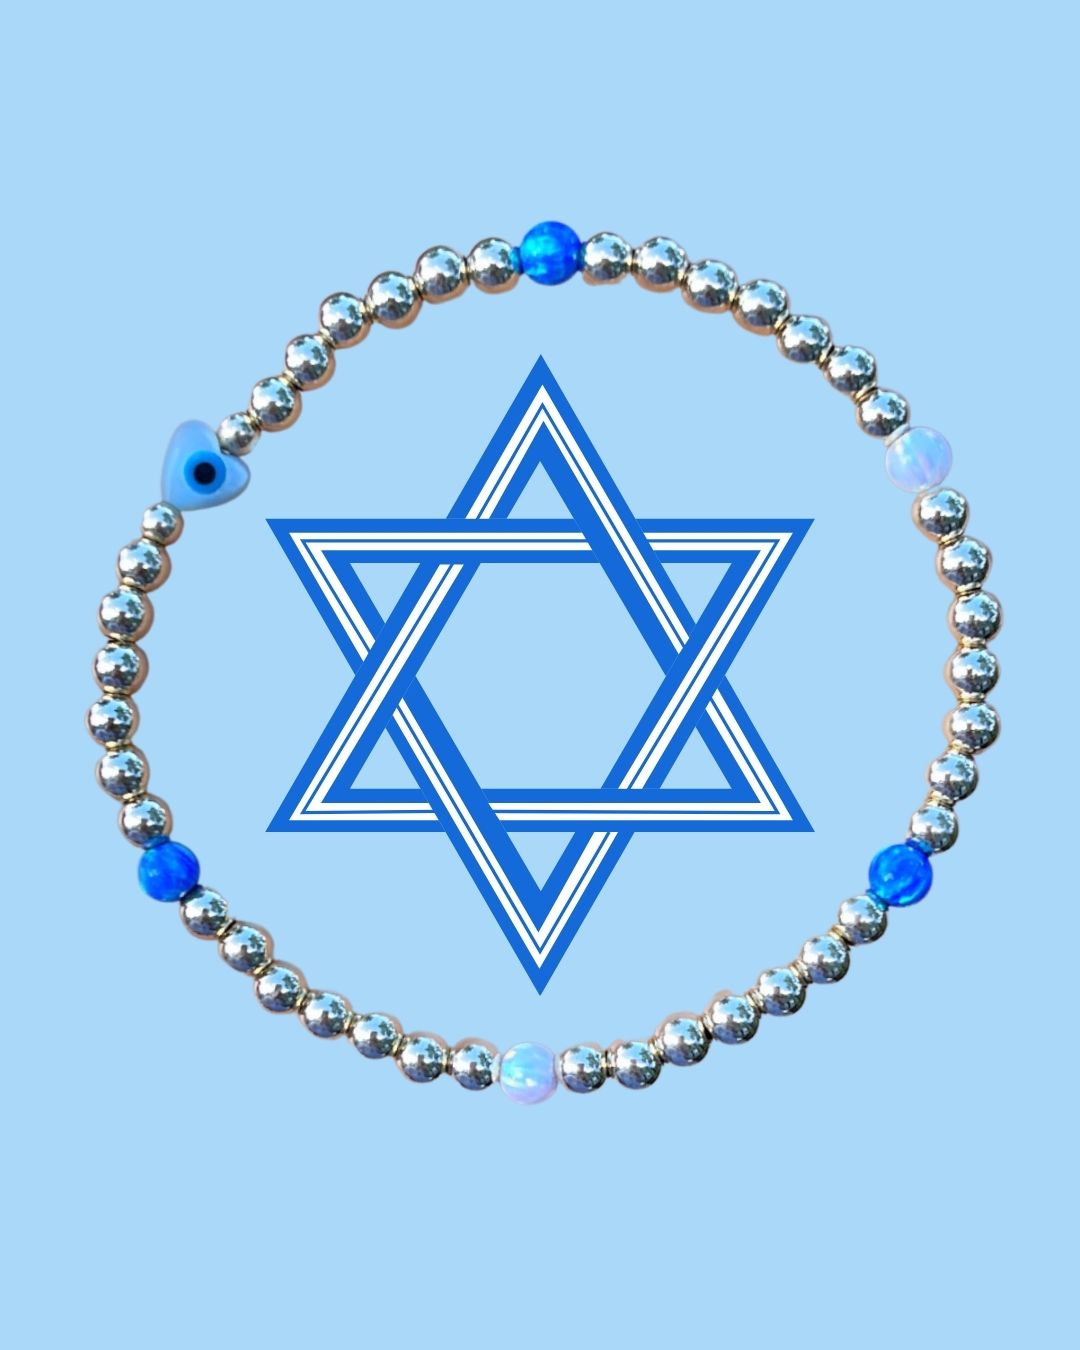 From the Heart - Israel Support Bracelet